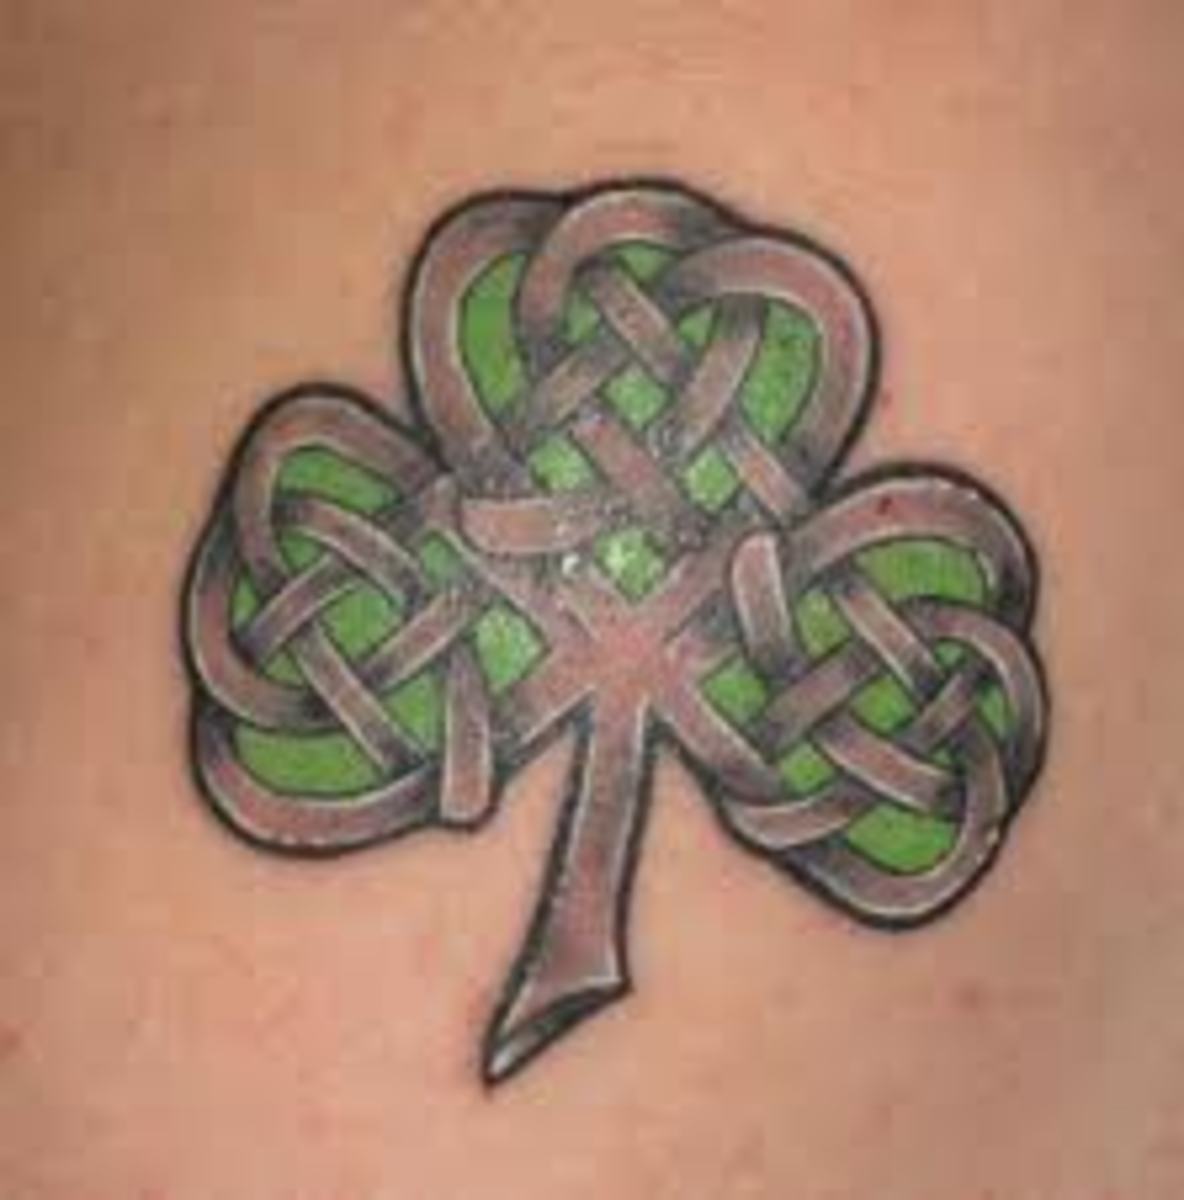 Great Ideas For Clover Tattoos;Clover And Shamrock Tattoo Meanings: Leprechaun Tattoos And Irish Symbols - HubPages